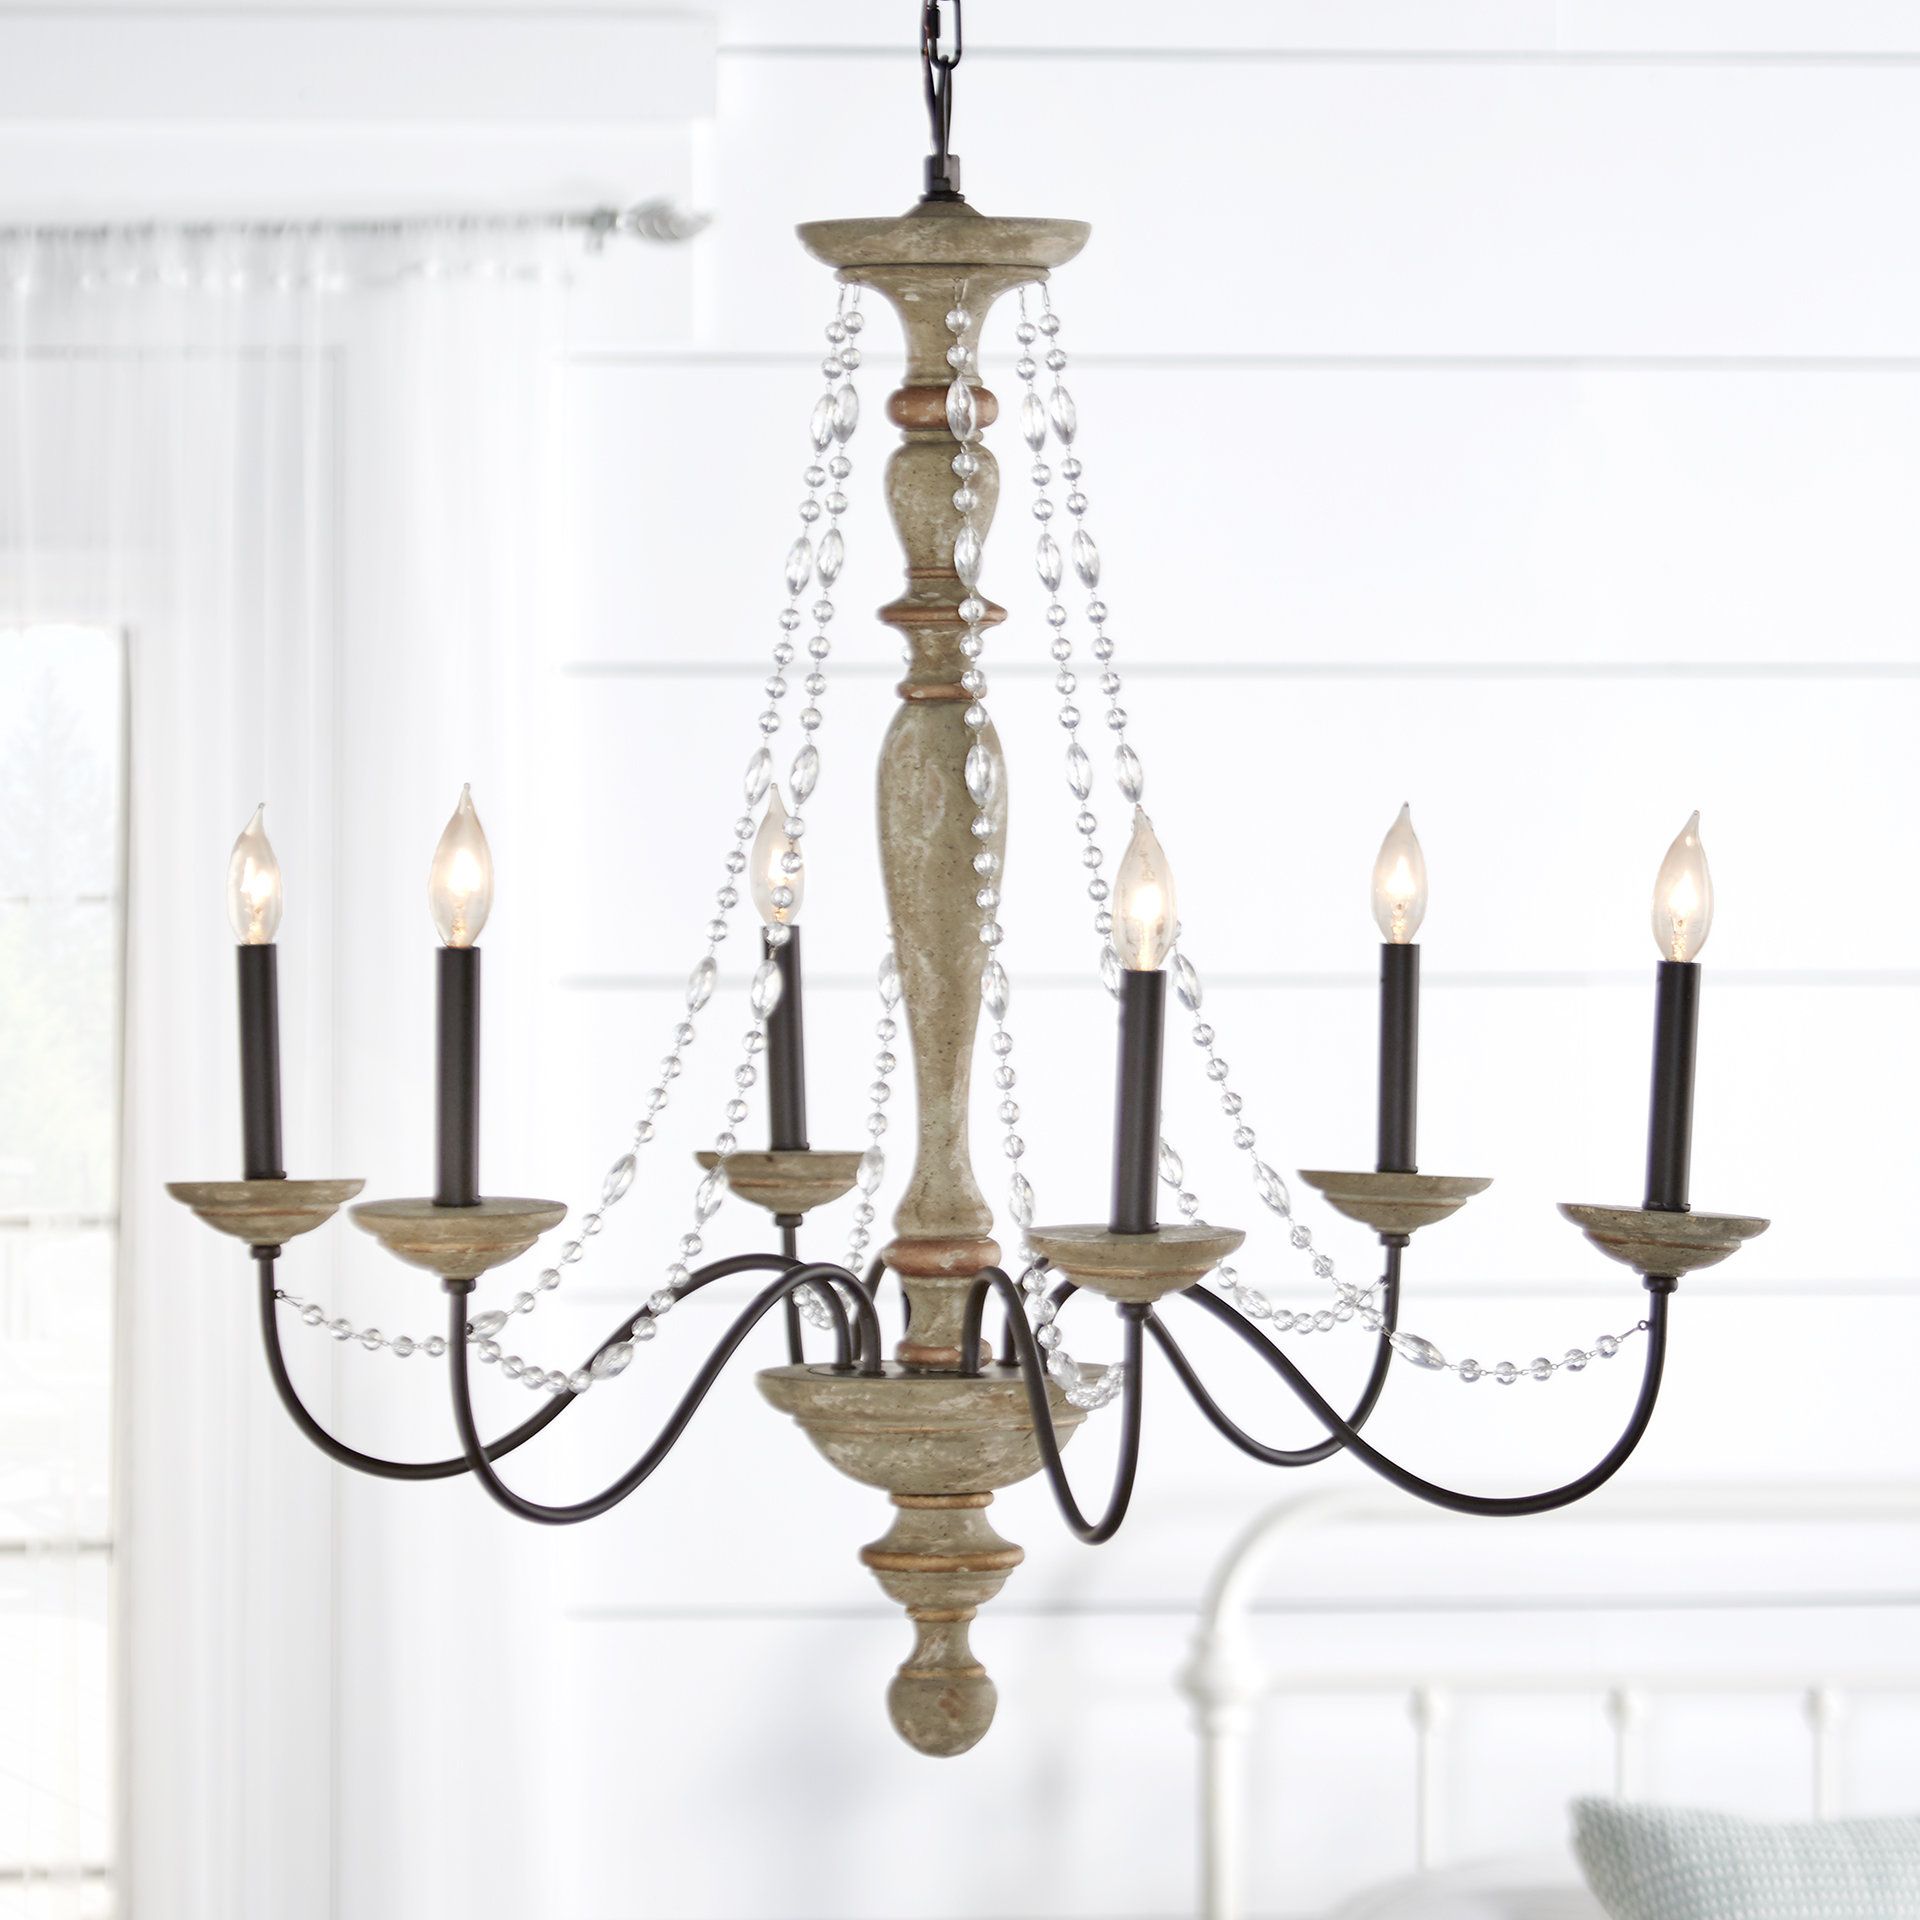 Three Posts Brennon 6 Light Candle Style Chandelier Within Newest Perseus 6 Light Candle Style Chandeliers (View 14 of 20)